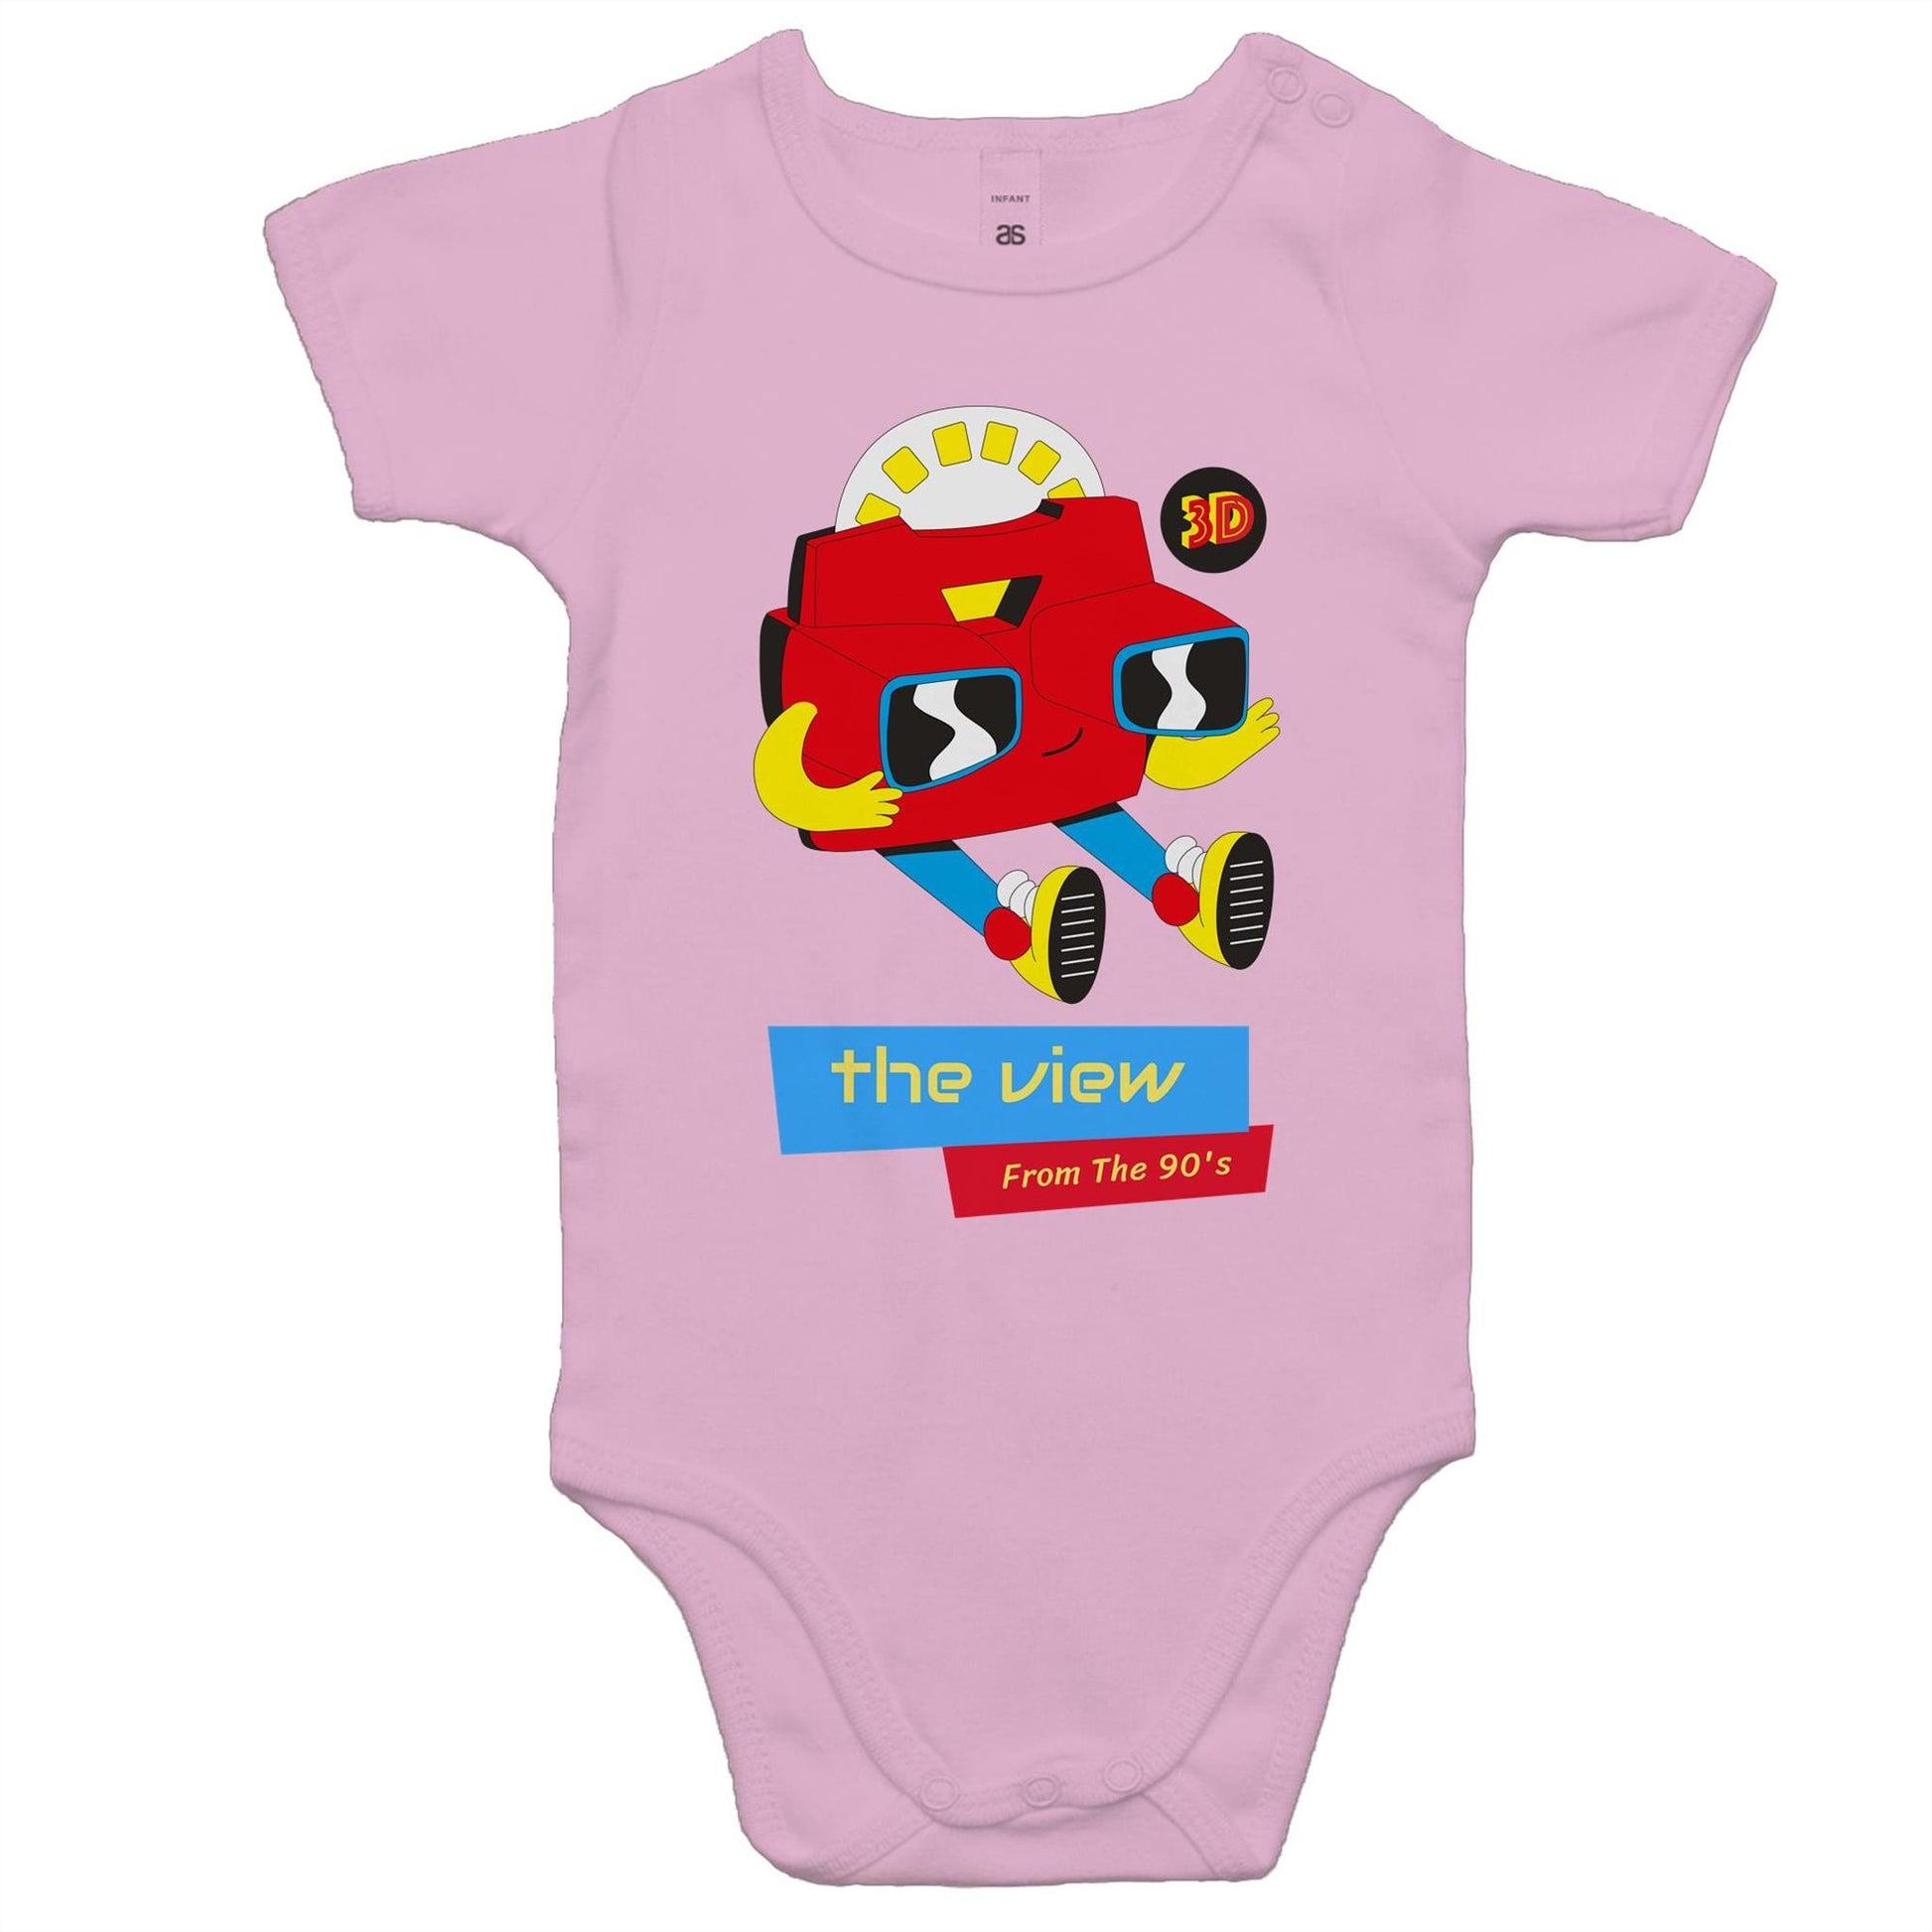 The View From The 90's - Baby Bodysuit Pink Baby Bodysuit Retro